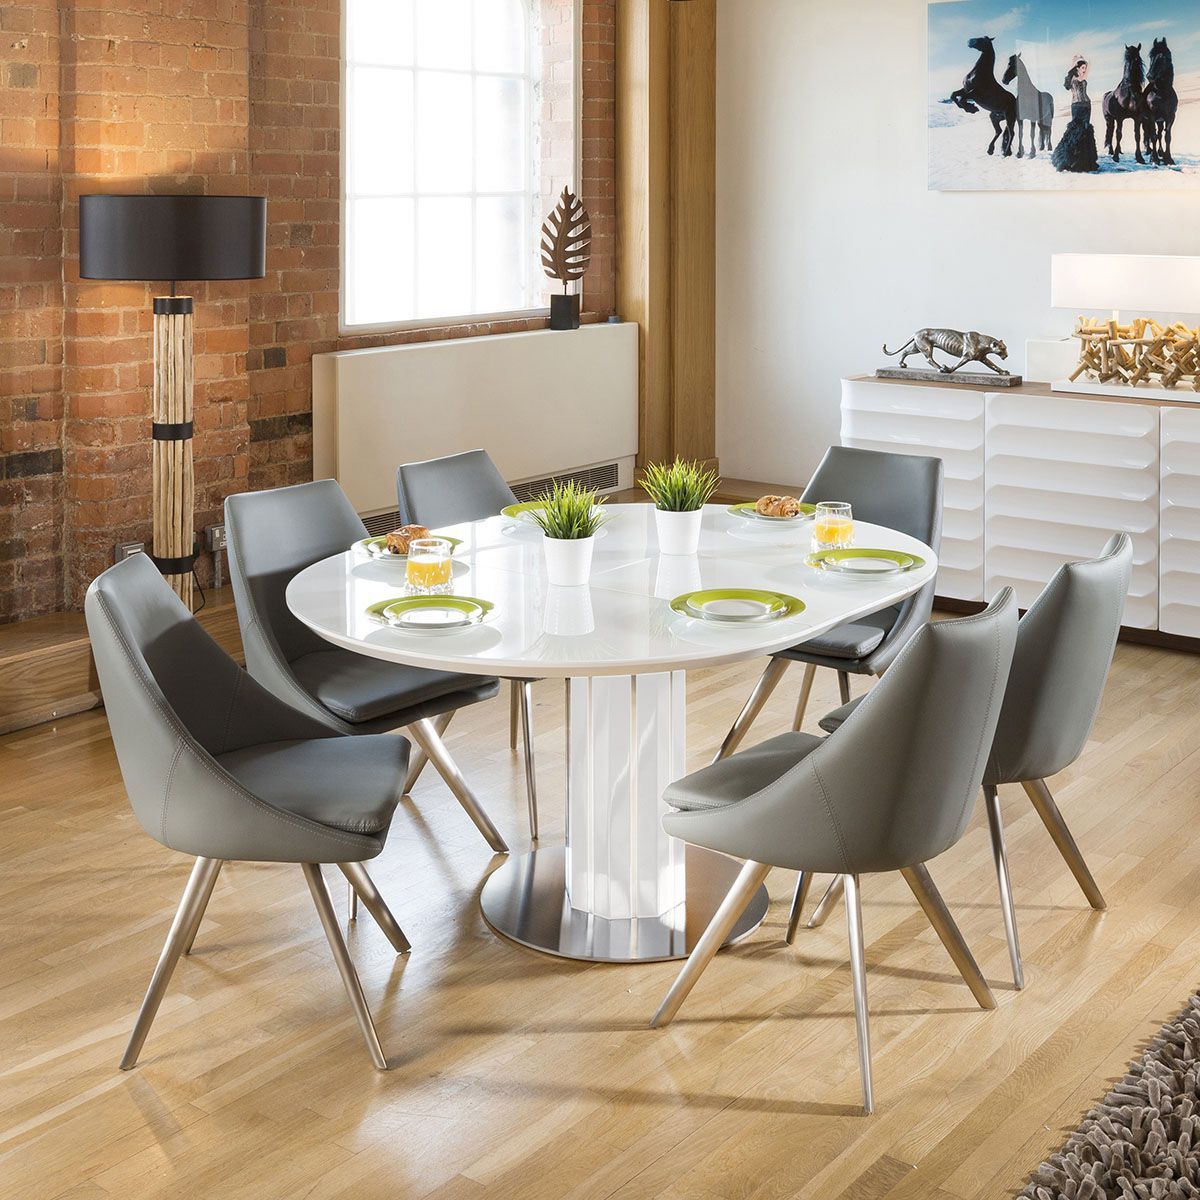 Best And Newest Extendable Oval Dining Sets With Regard To Modern Extending Dining Set Round / Oval Glass Wht Table 6 Grey Chairs (View 12 of 15)